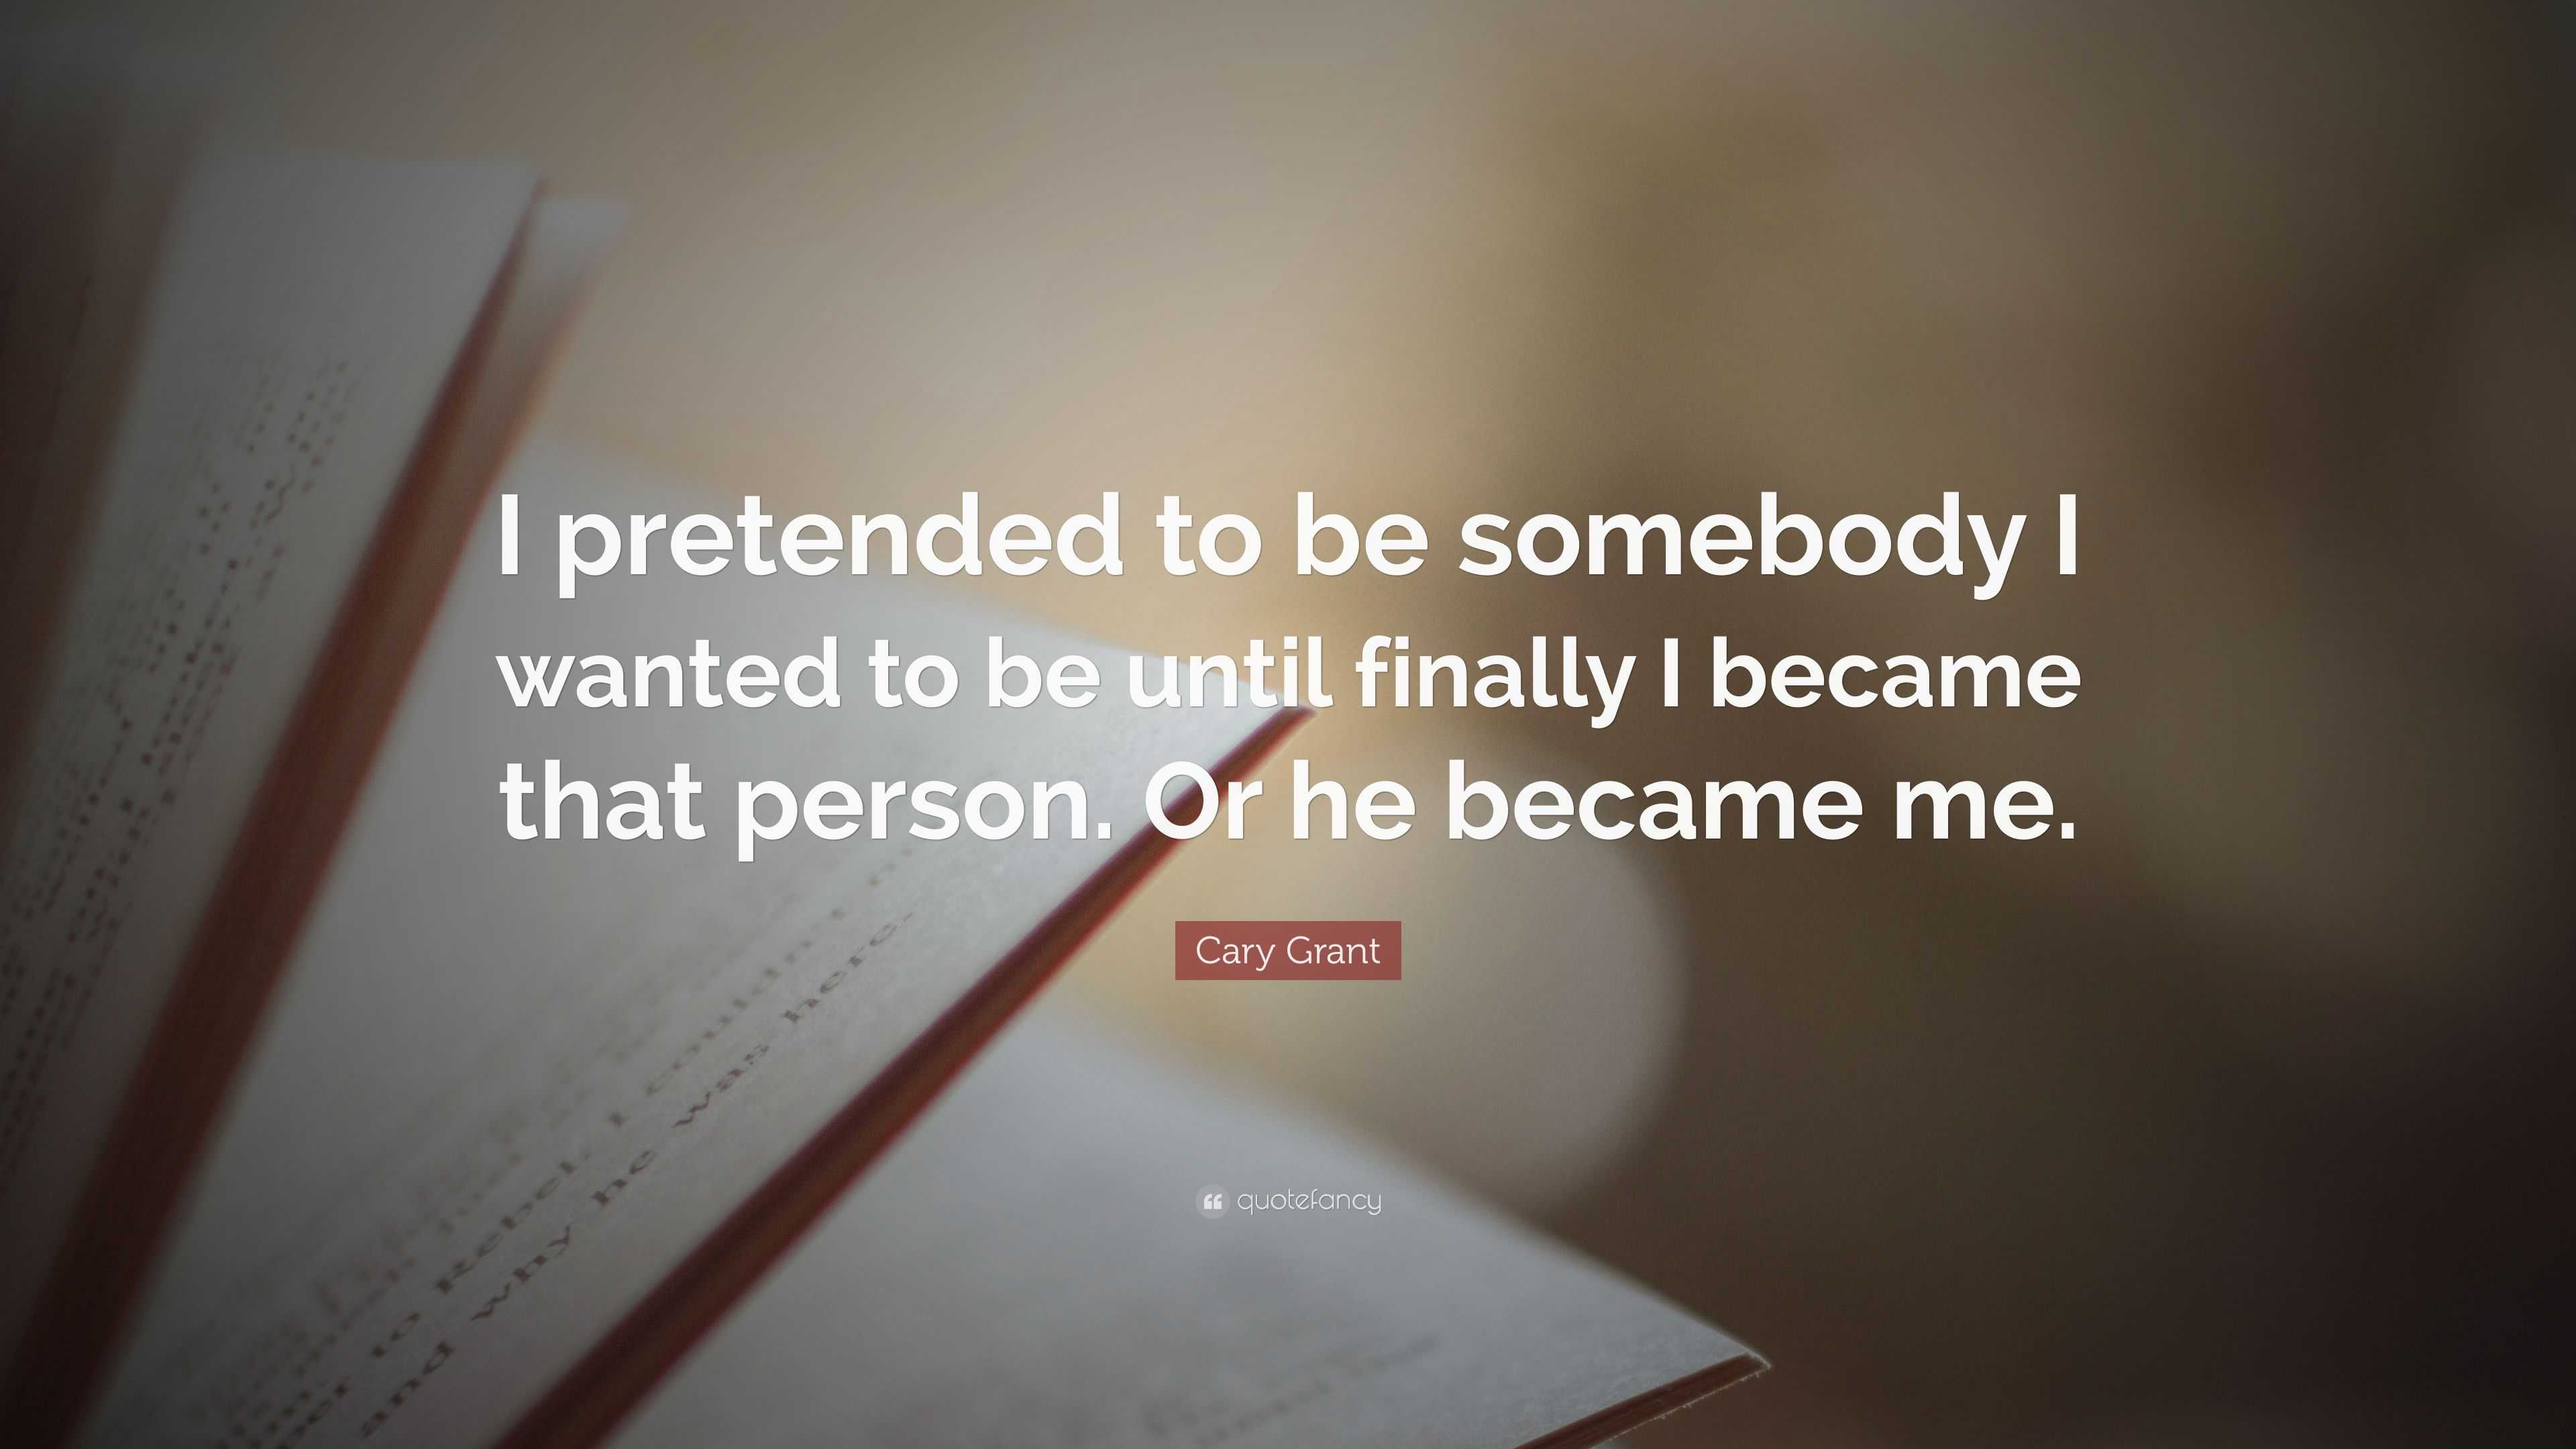 Cary Grant Quote: “I pretended to be somebody I wanted to be until ...